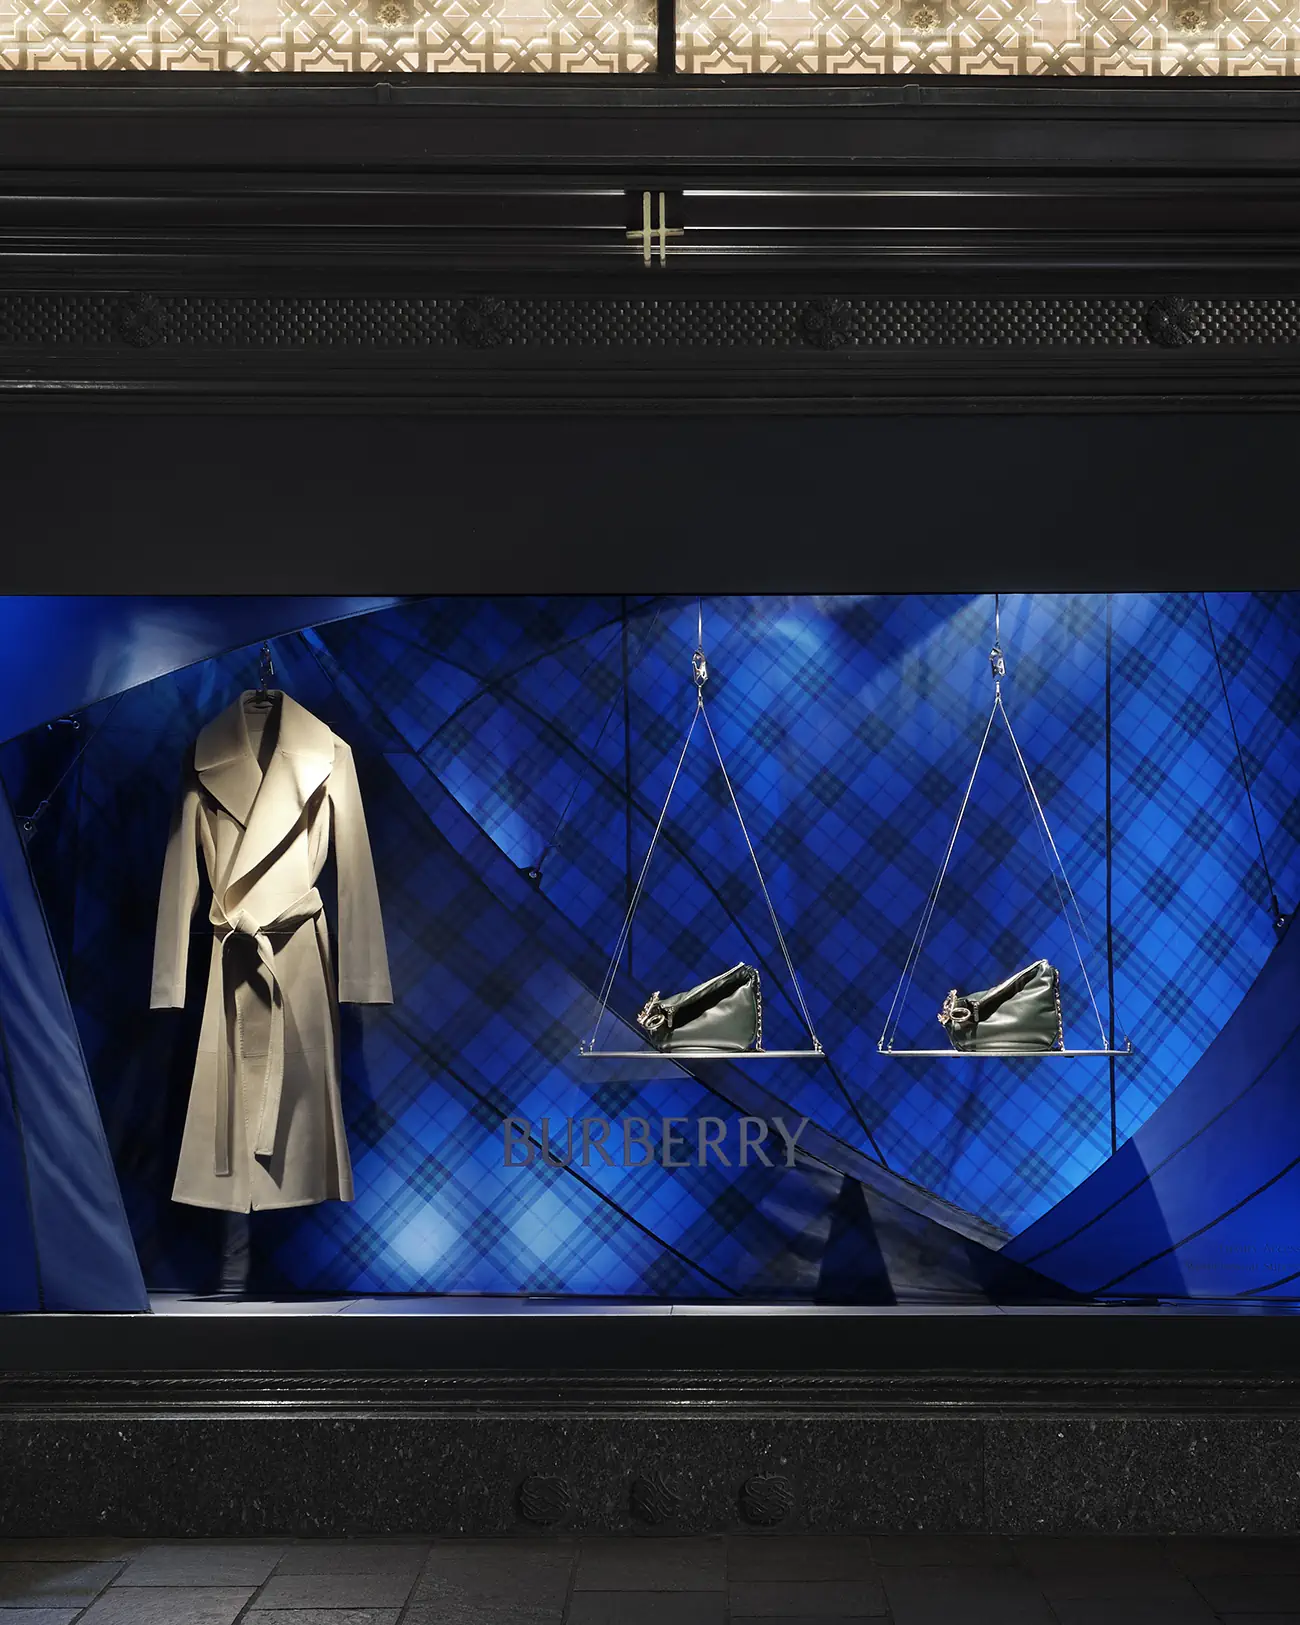 Burberry transforms Harrods for the store's 175th anniversary